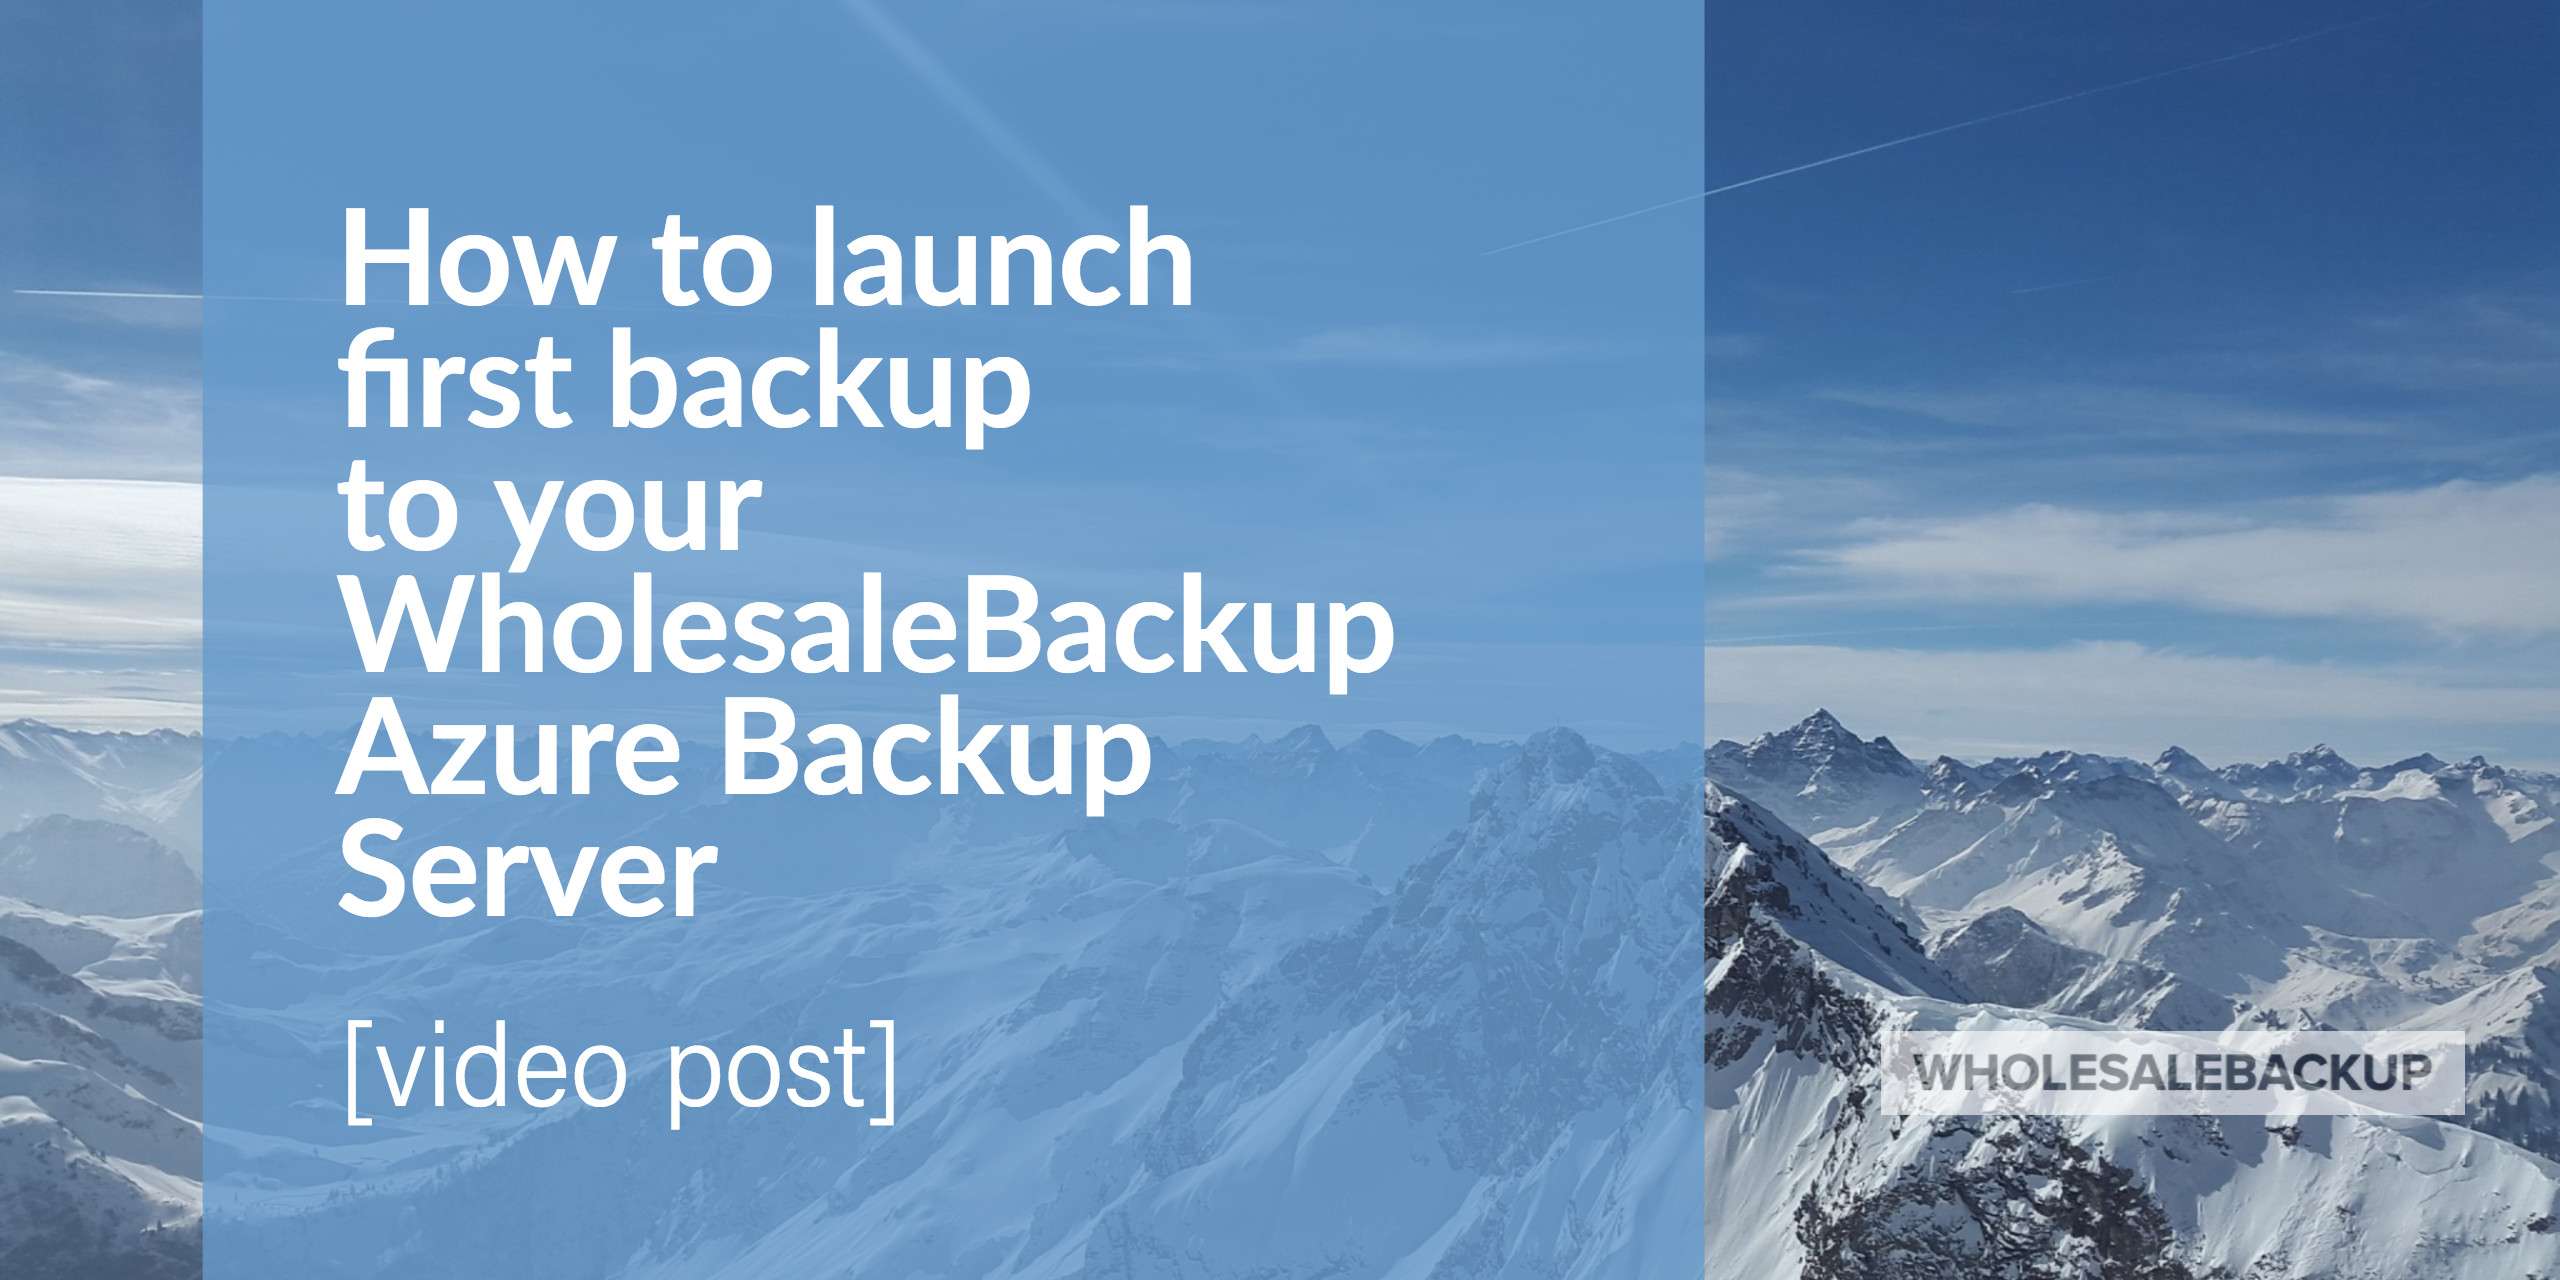 How to launch first backup to your WholesaleBackup Azure Backup Server